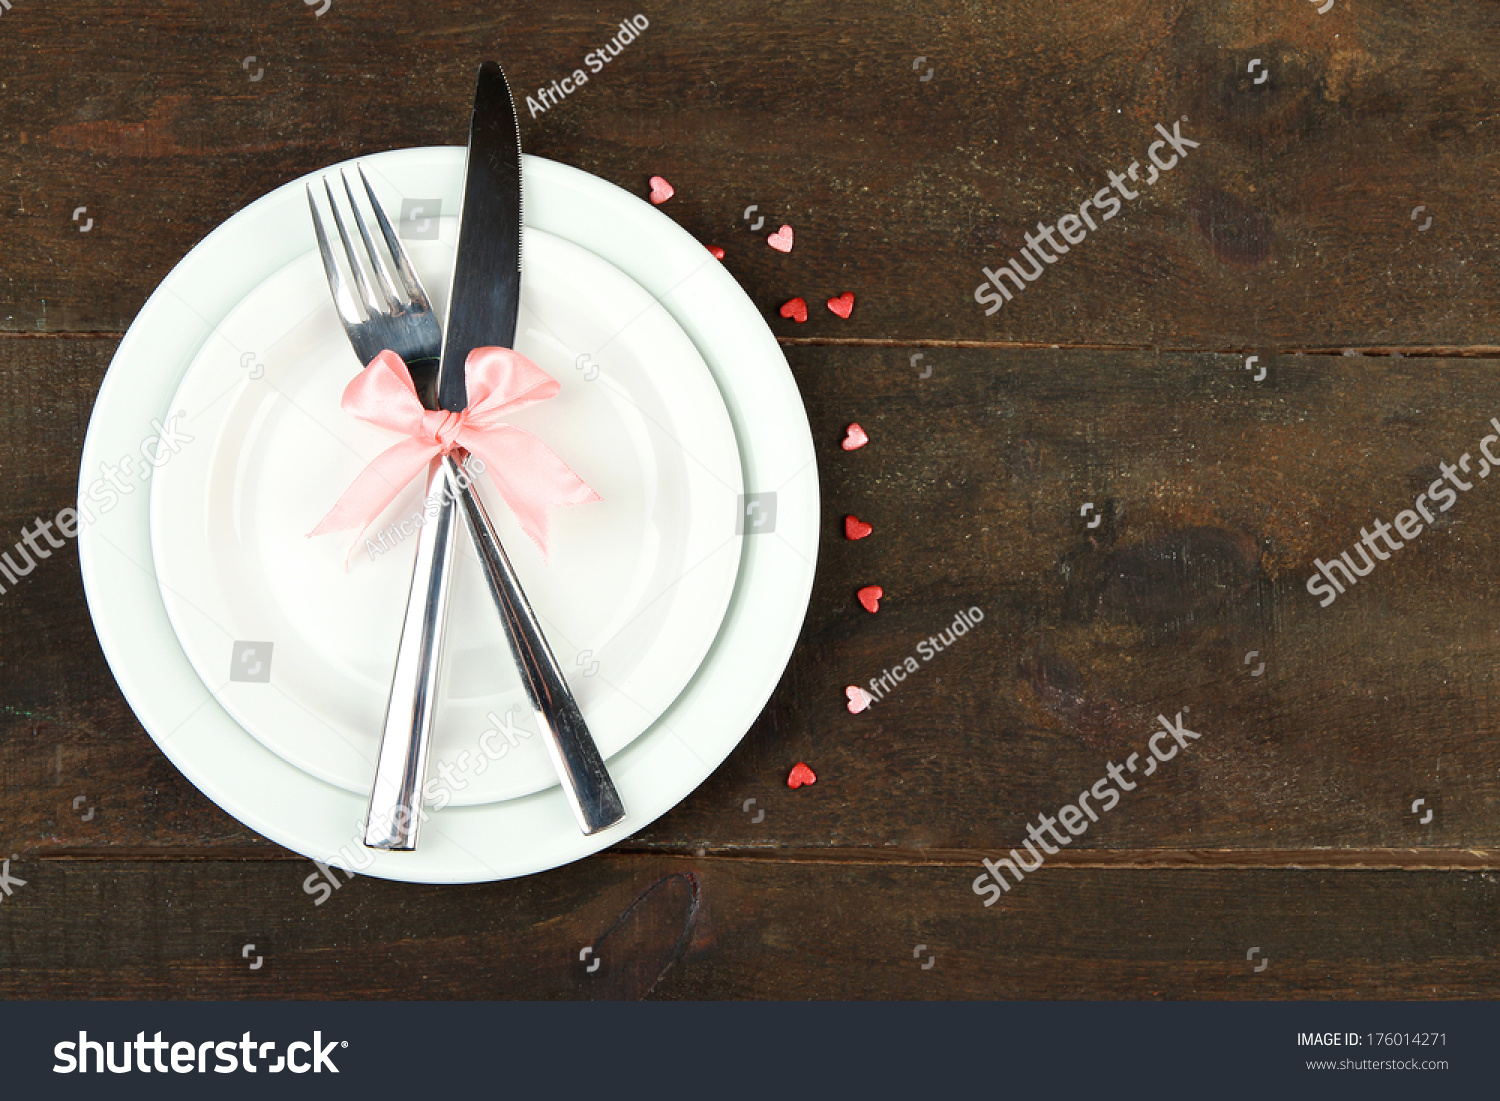 Romantic holiday table setting, on wooden background #176014271